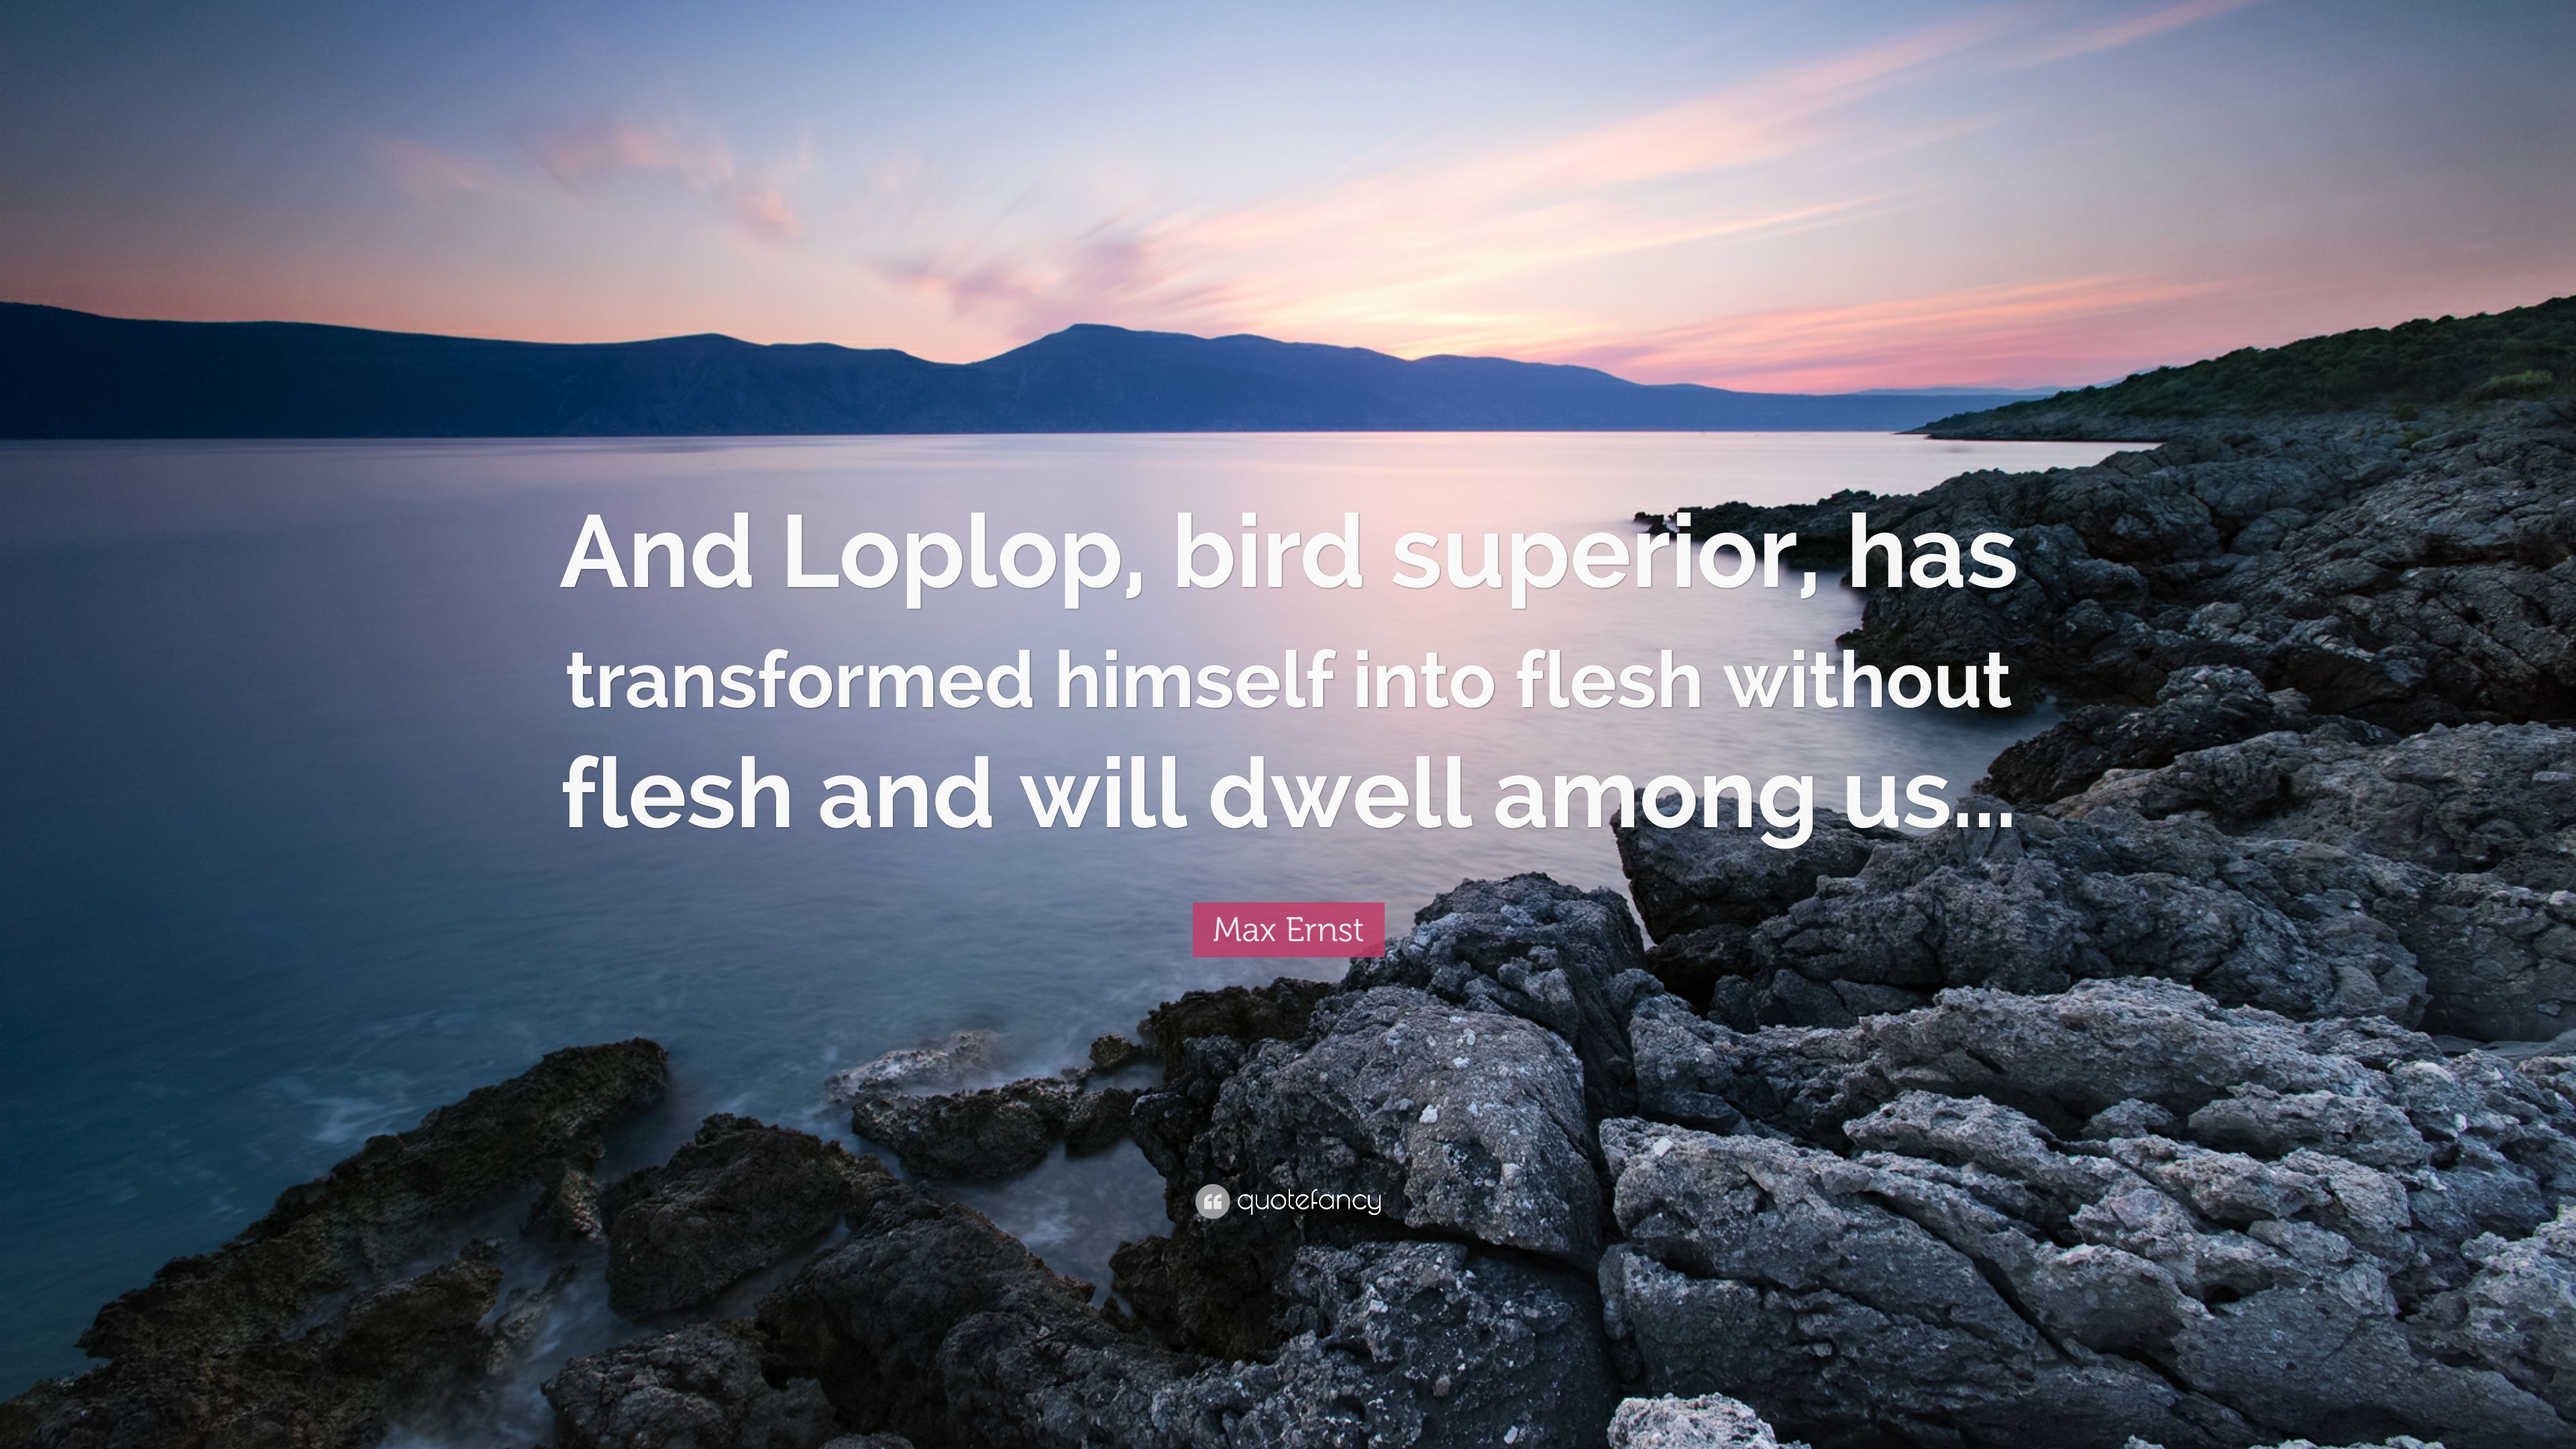 Max Ernst Quote: “And Loplop, bird superior, has transformed